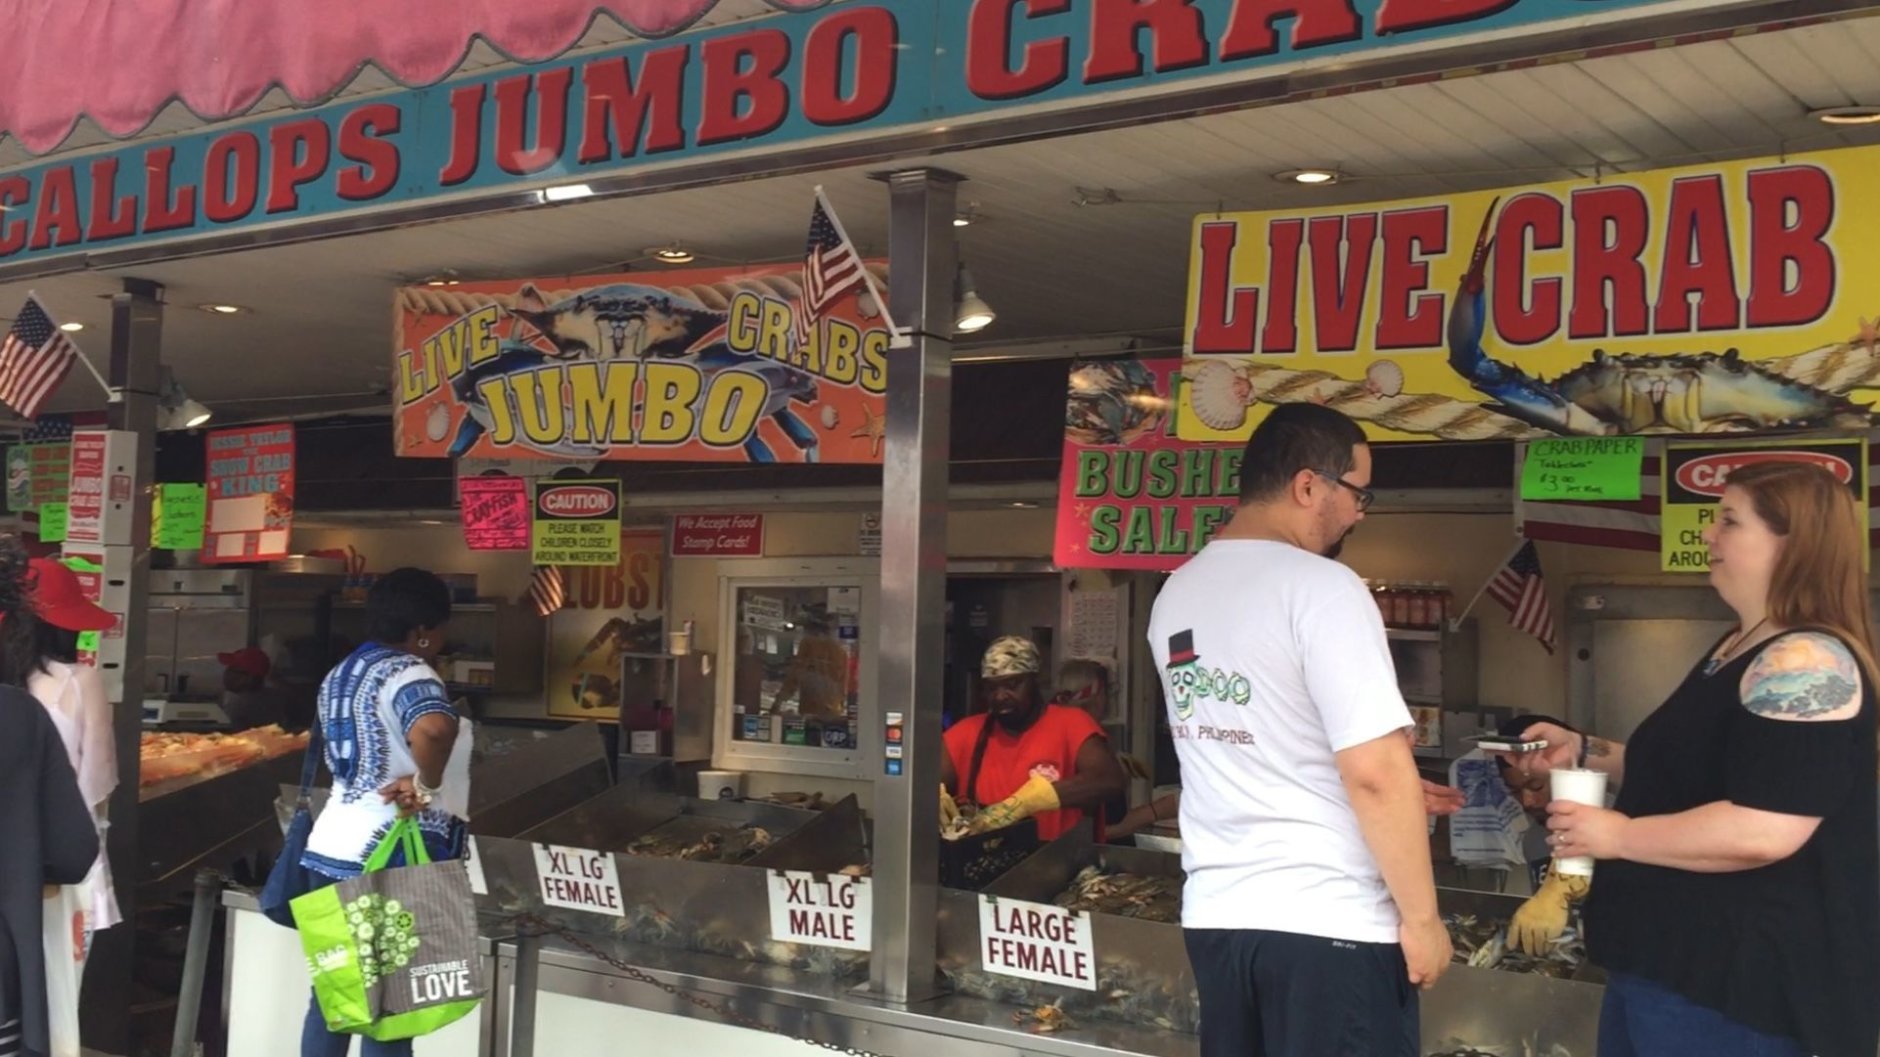 Business was slower than expected for the Fourth of July, according to a Fish Market vendor. (WTOP/Kristi King)